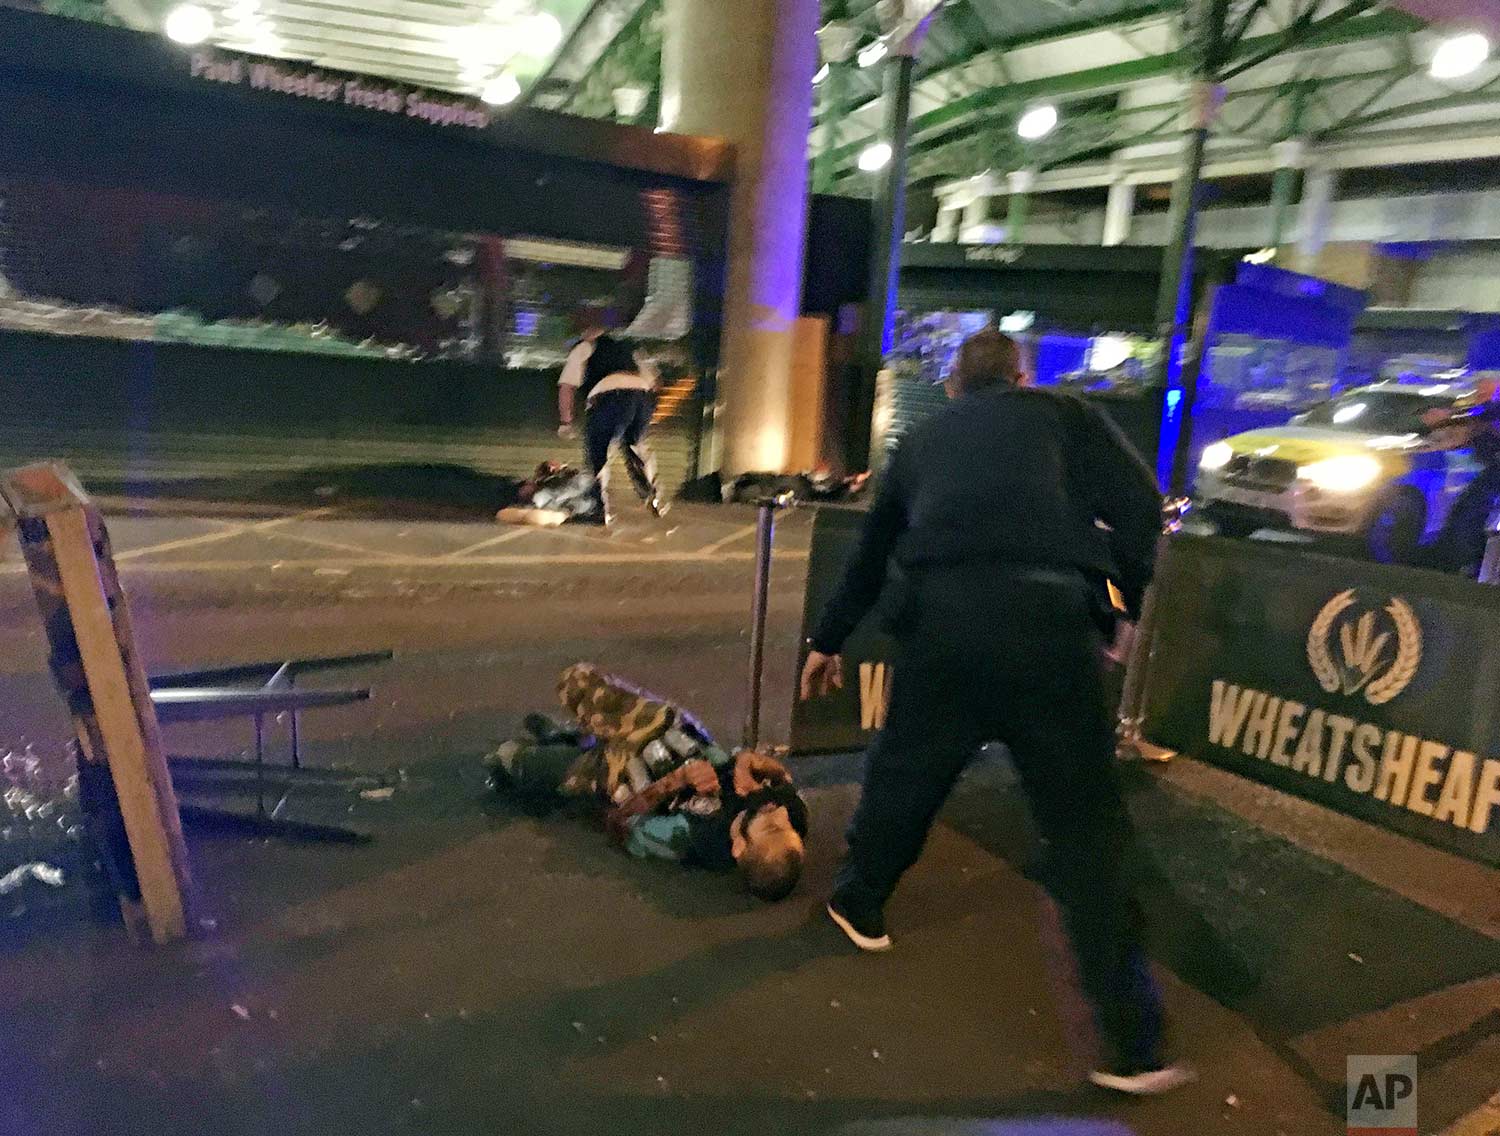  In this image provided by Gabriele Sciotto taken on Saturday, June 3, 2017, one of the suspects from the London Bridge attack, wearing what appear to be canisters strapped to his chest, lies on the ground after being shot by police outside Borough M